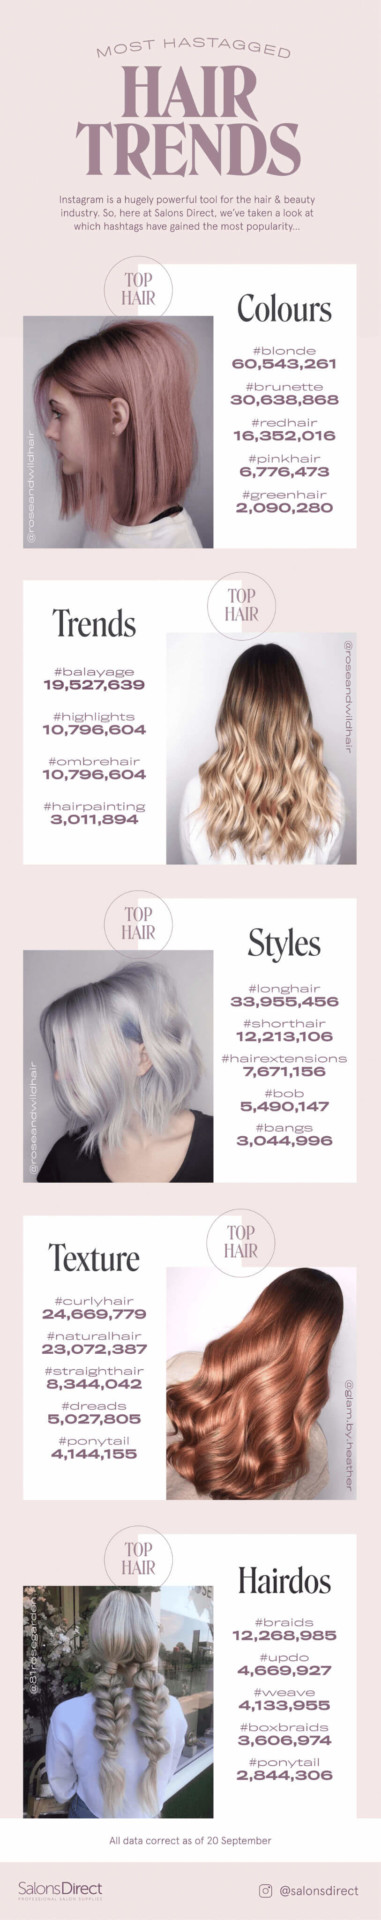 Top Social Media Tags for Hair Trends – 